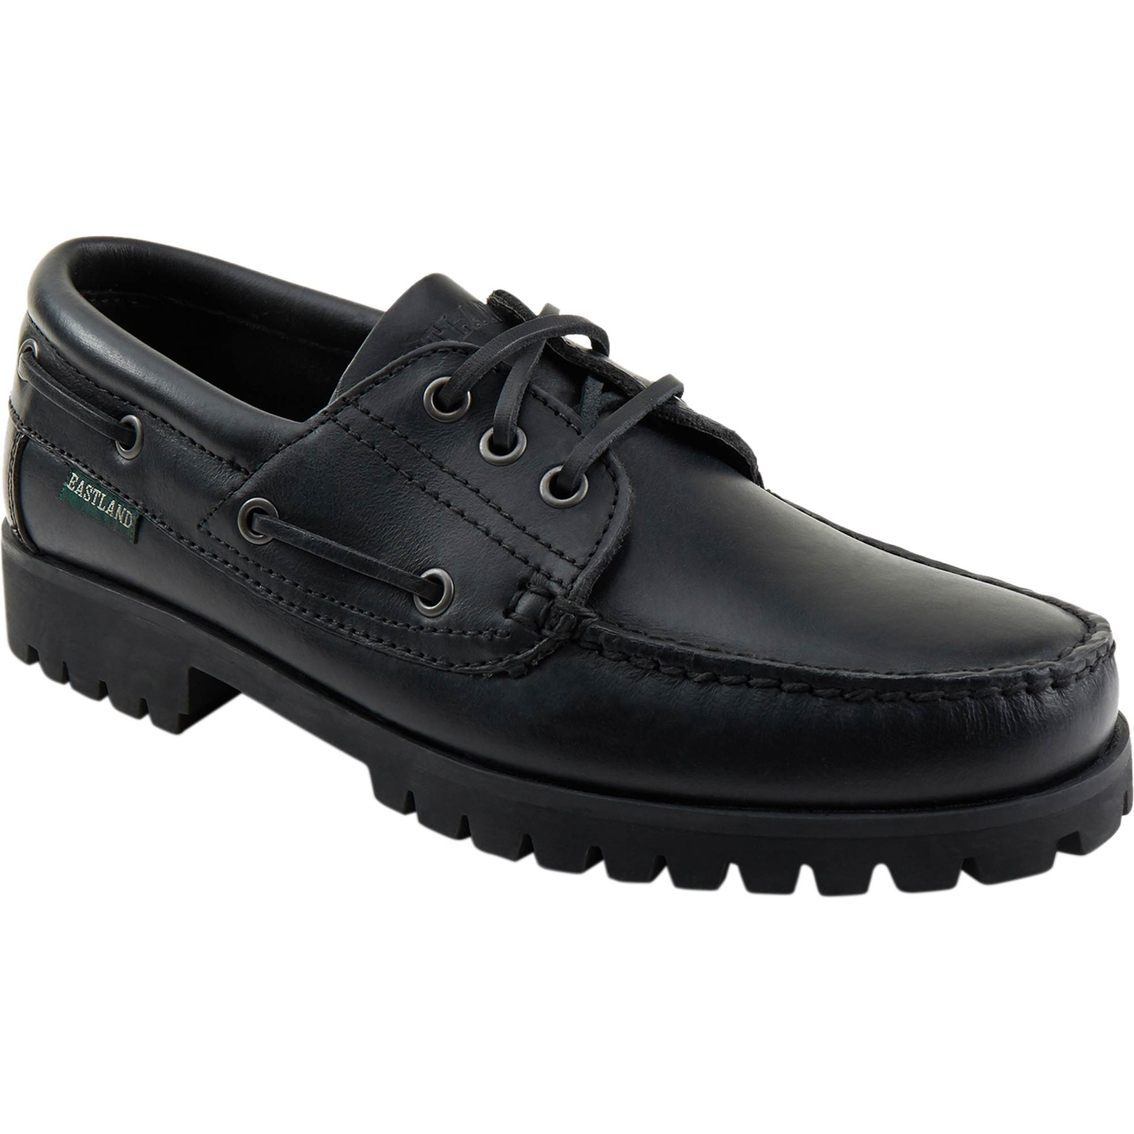 Eastland Seville Oxford Shoes | Casuals 